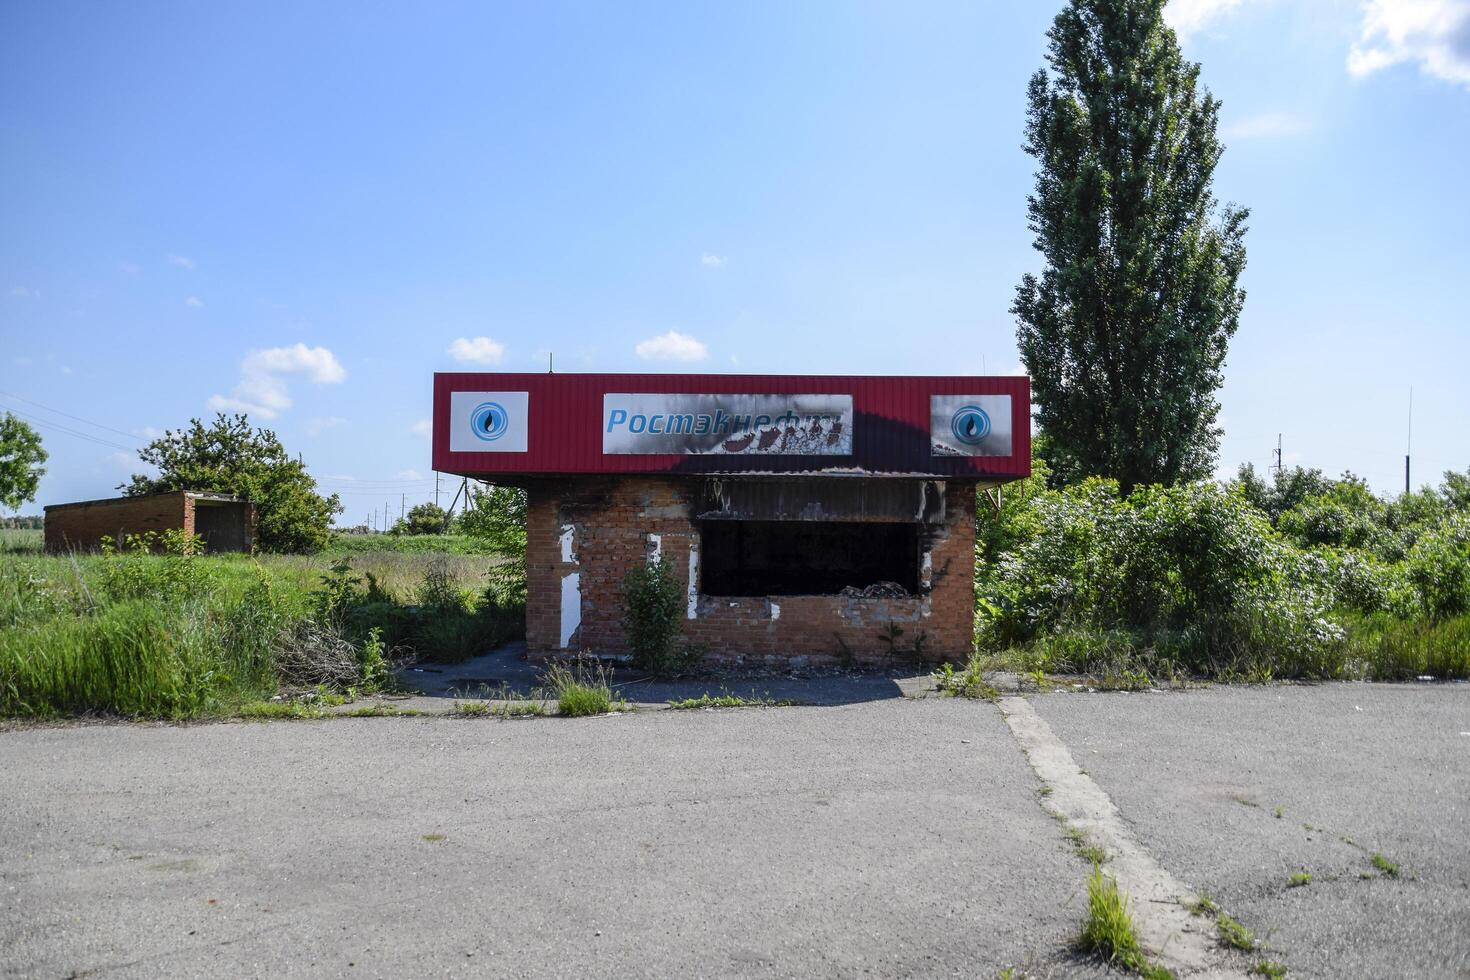 Russia, Novorossiysk 2021. Burned gas station. Ruins in the place of a burnt petrol station. photo